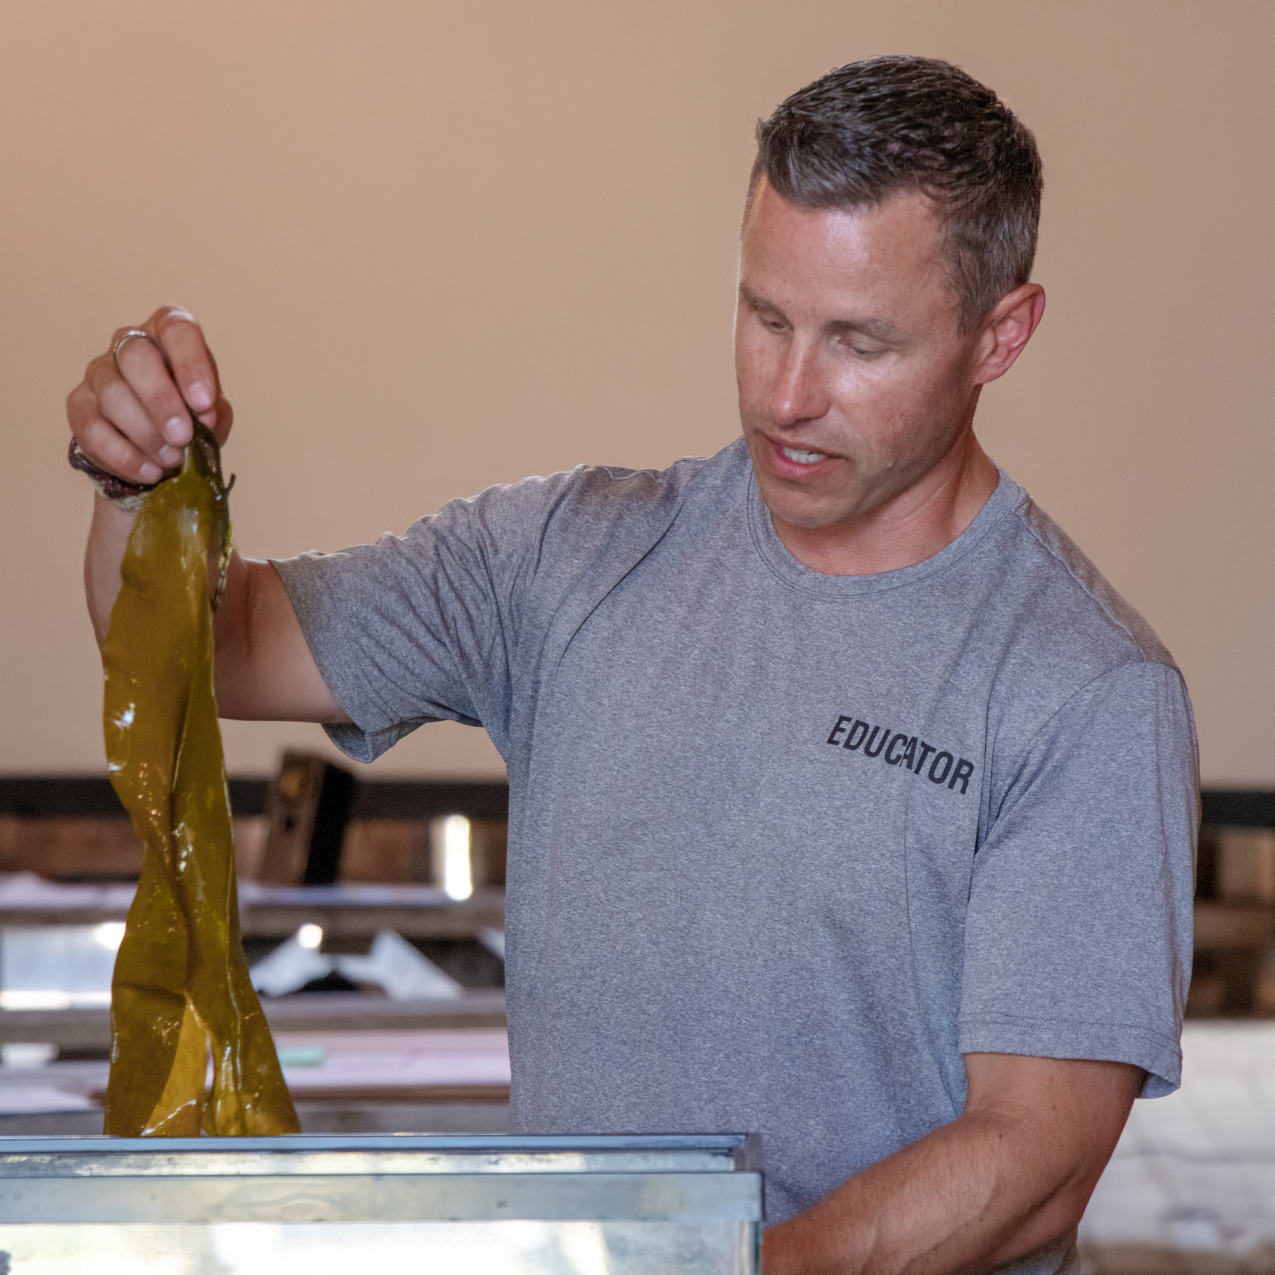 A teacher wearing a gray shirt that says “educator” lifts a large piece of brown seaweed from a tank.